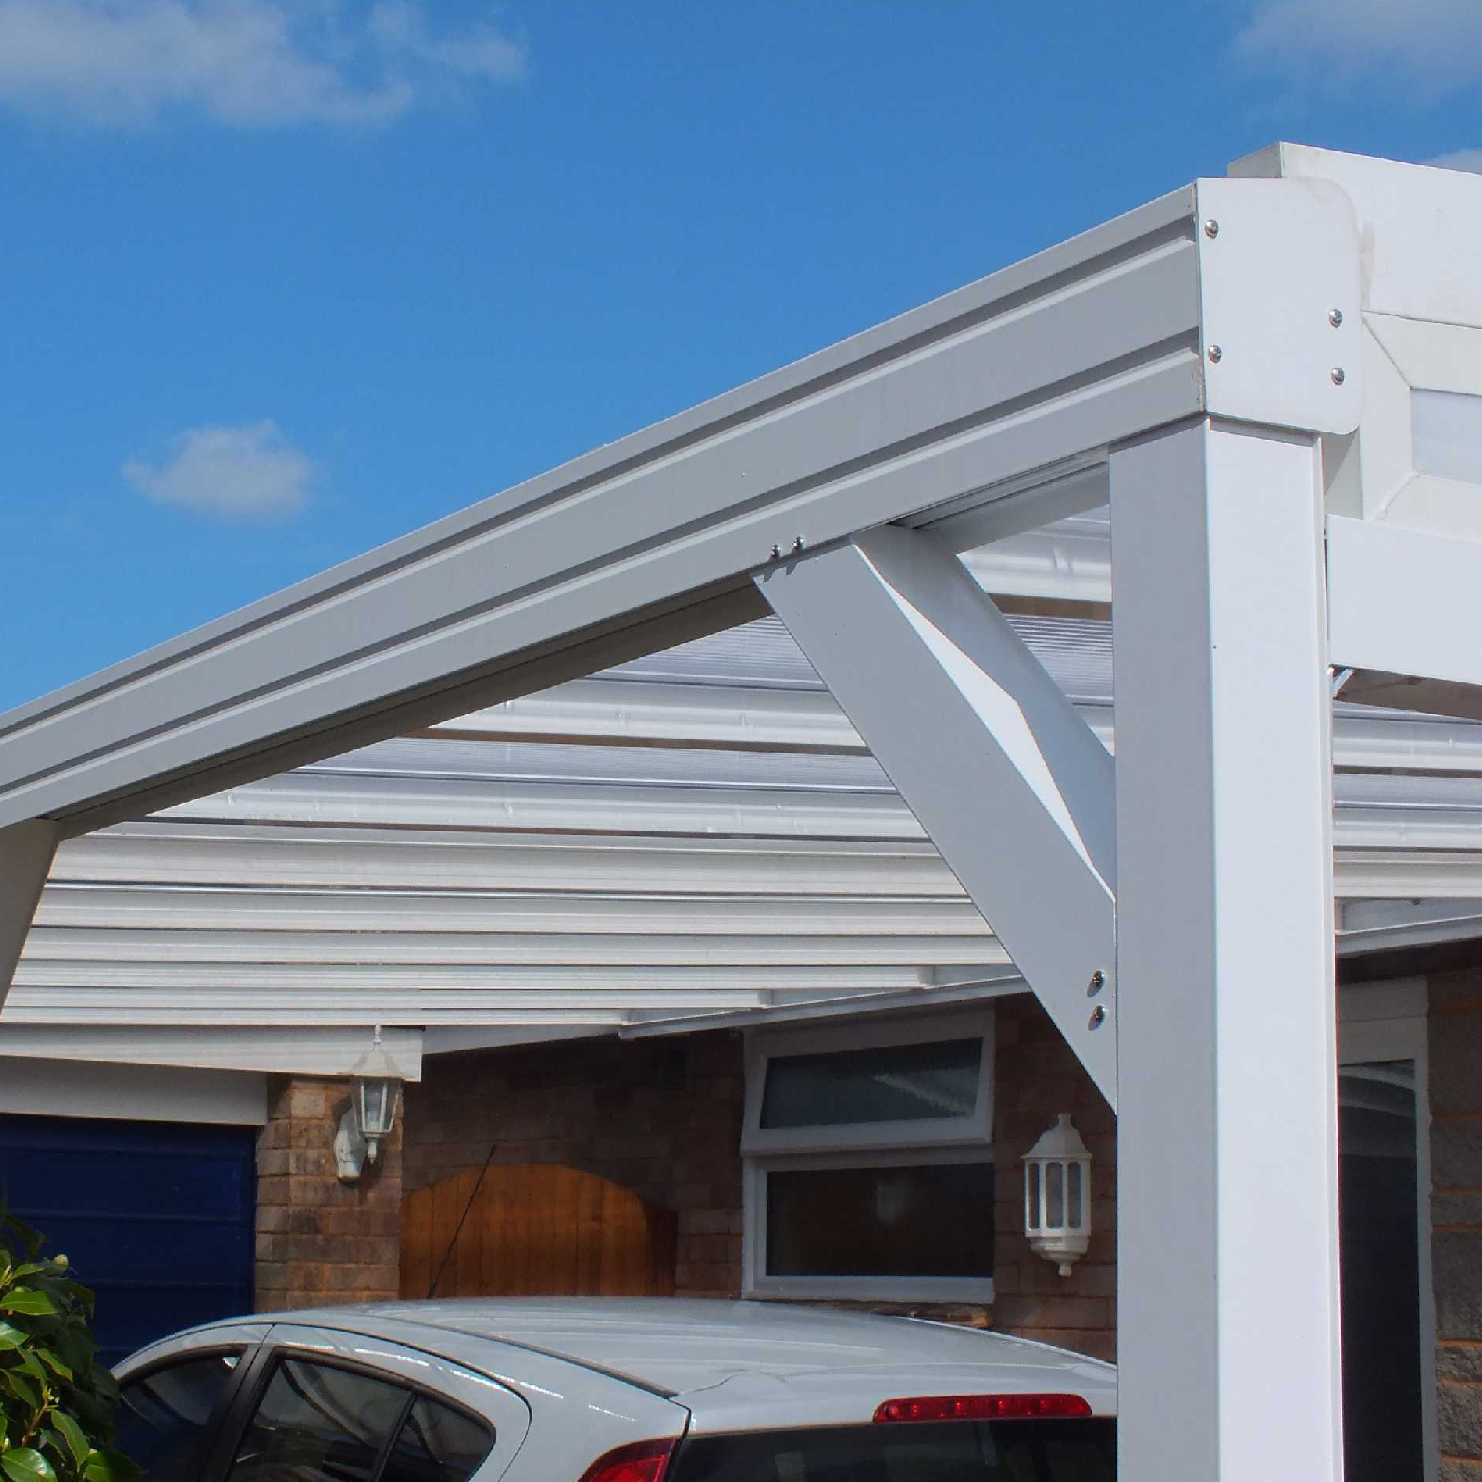 Buy Omega Smart Lean-To Canopy, White with 16mm Polycarbonate Glazing - 5.2m (W) x 2.5m (P), (3) Supporting Posts online today